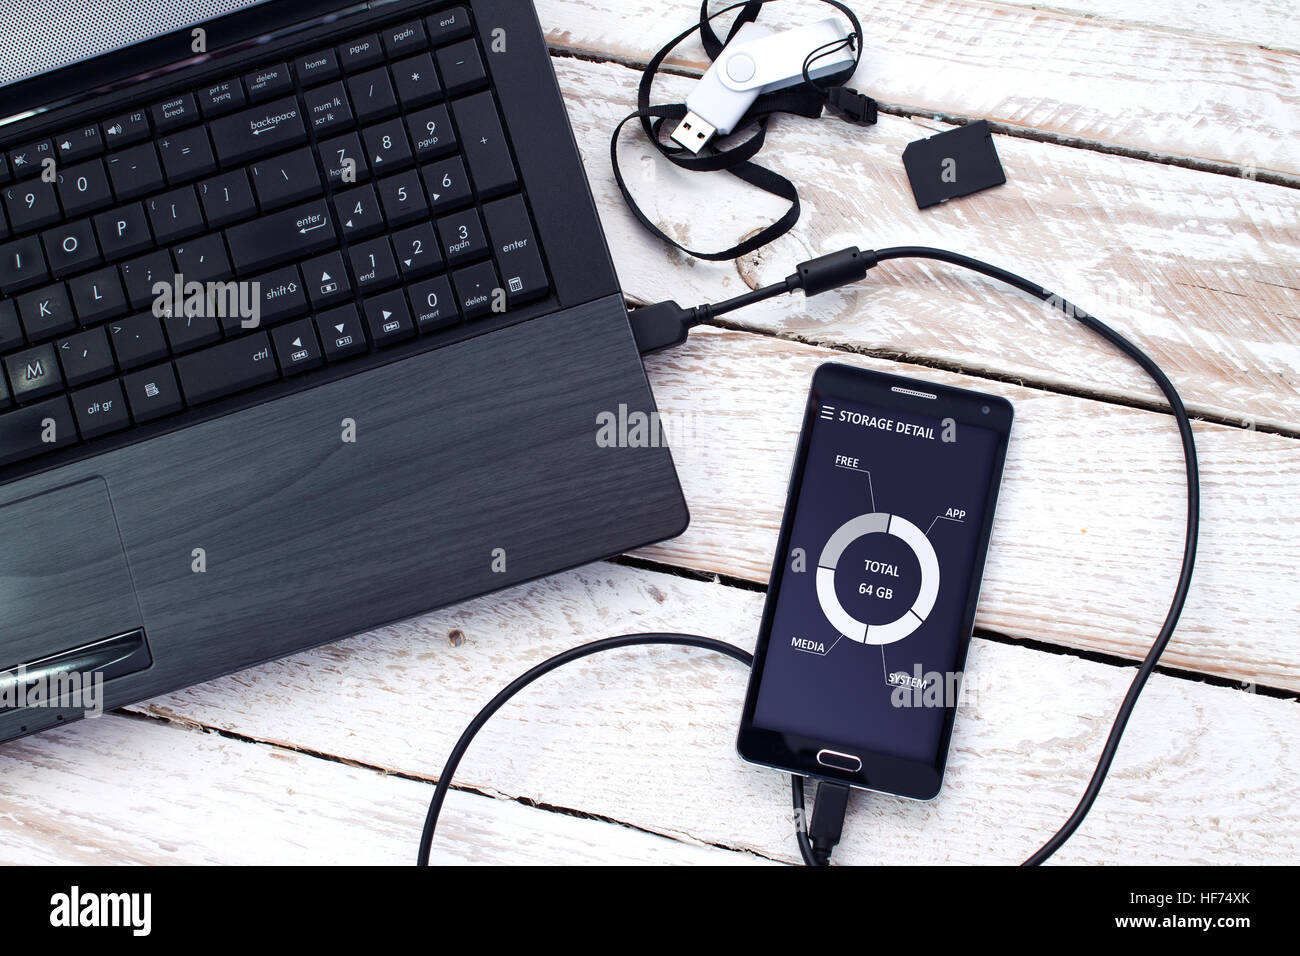 Laptop with pendrive, sd card and smartphone. Concept of data storage. Stock Photo